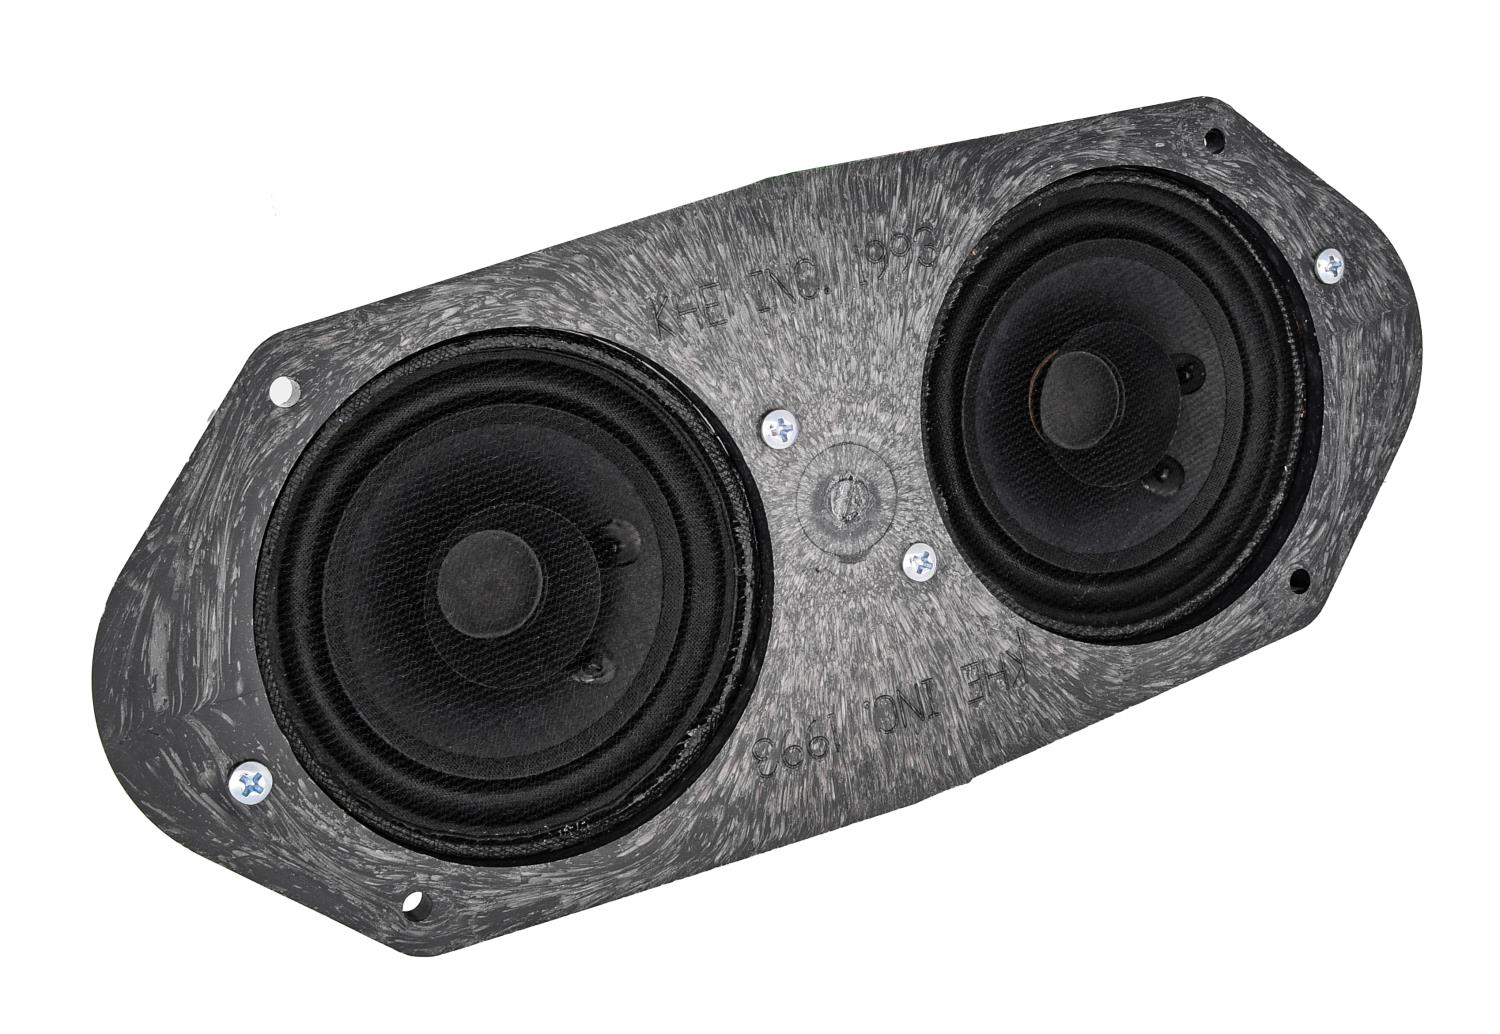 Dual Dash Speakers Fits Select 1973-1986 Chevrolet and